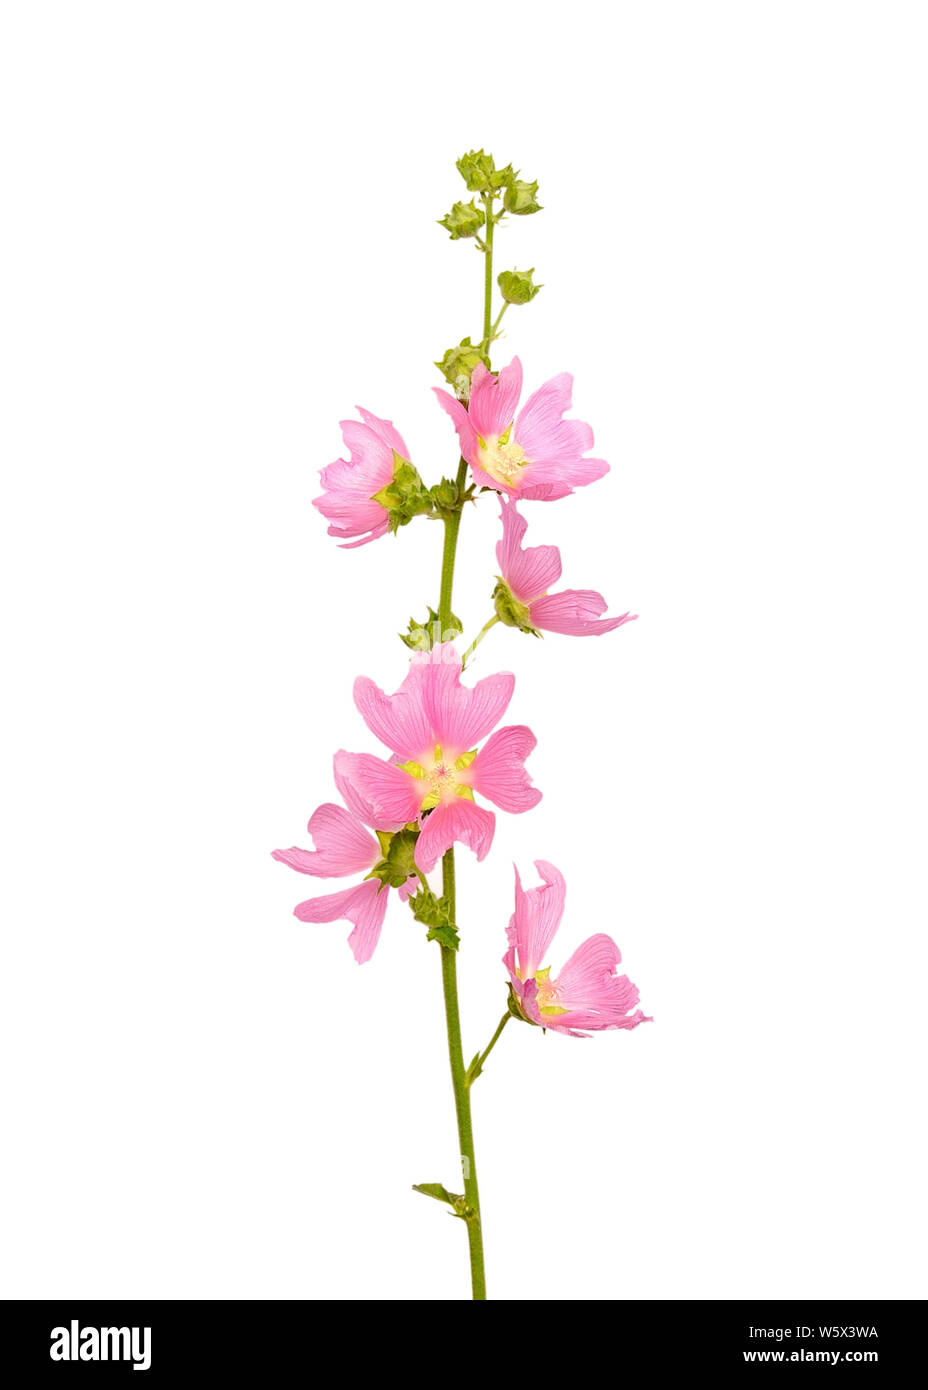 Malva rose flower isolated on white background Banque D'Images